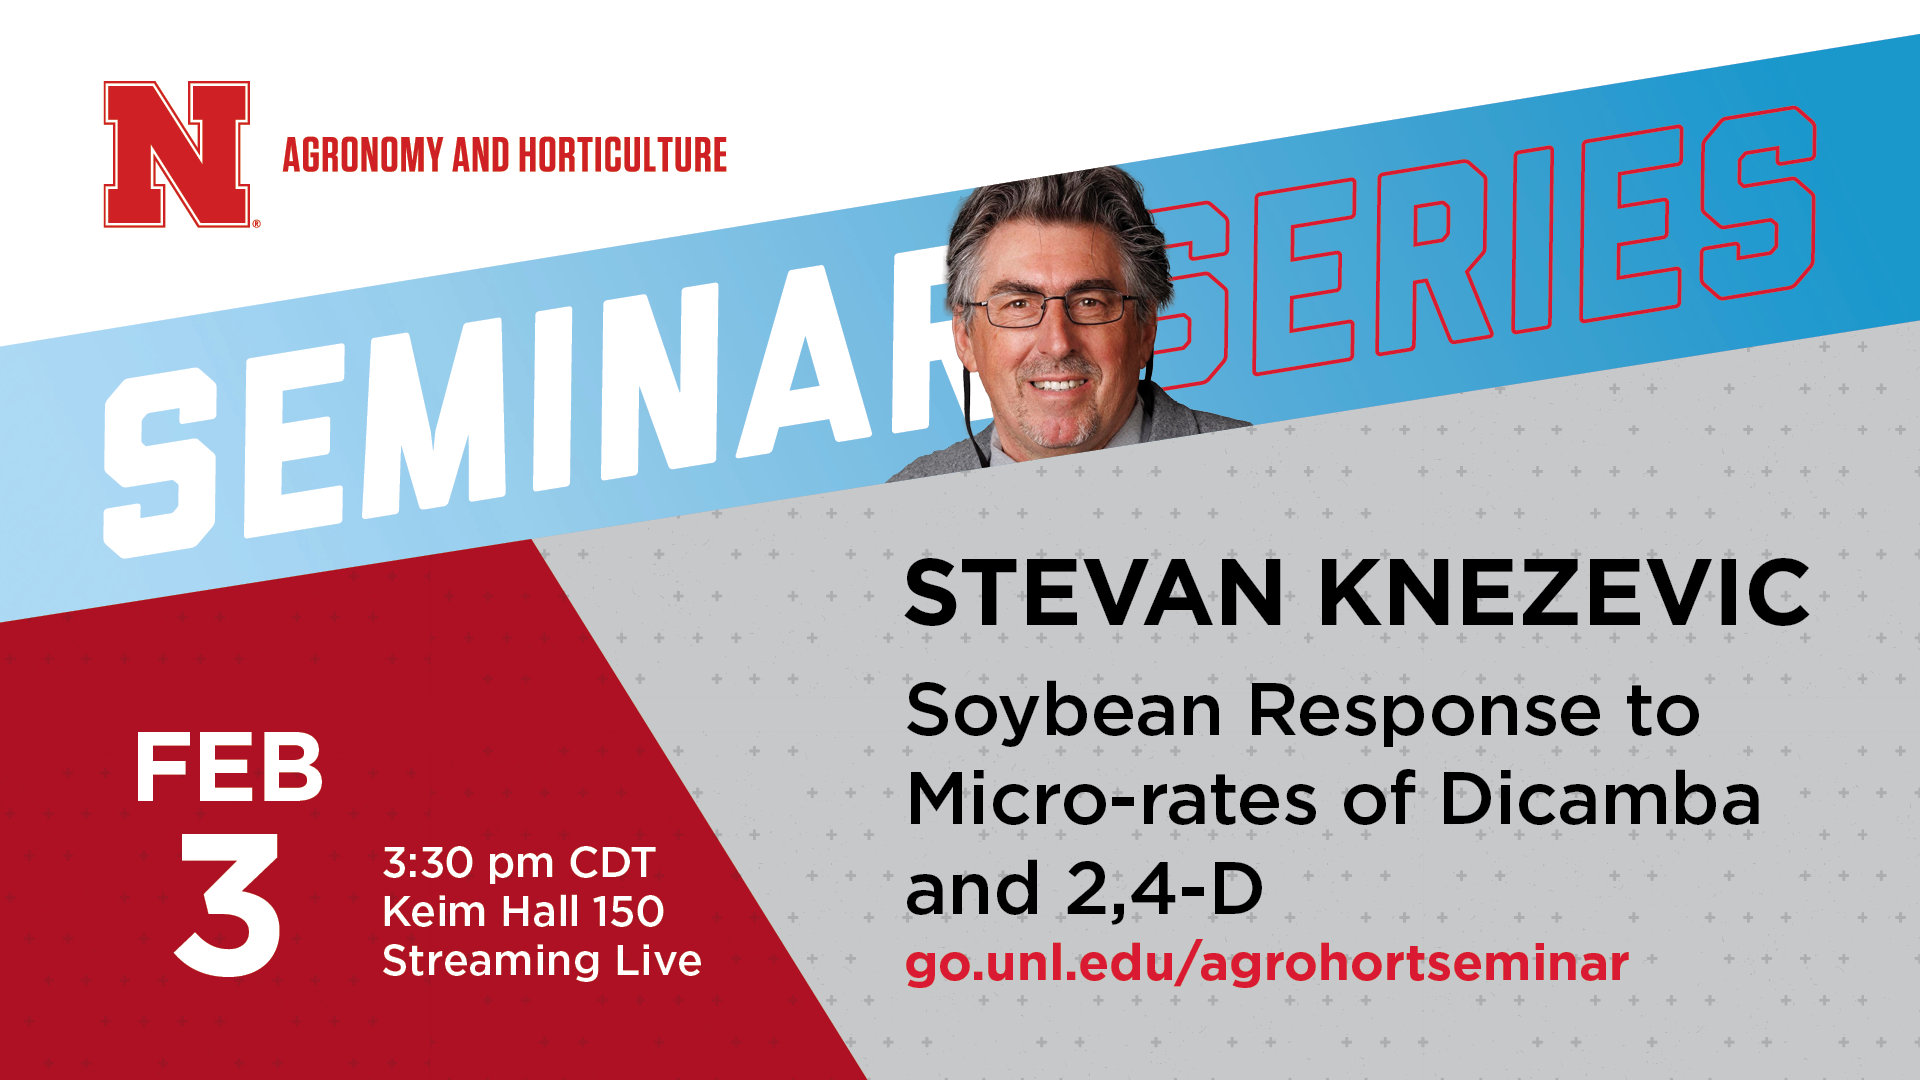 The spring Agronomy and Horticulture seminar series begins with “Soybean Response to Micro-rates of Dicamba and 2,4-D” presented by Nebraska’s Stevan Knezevic on Feb. 3.